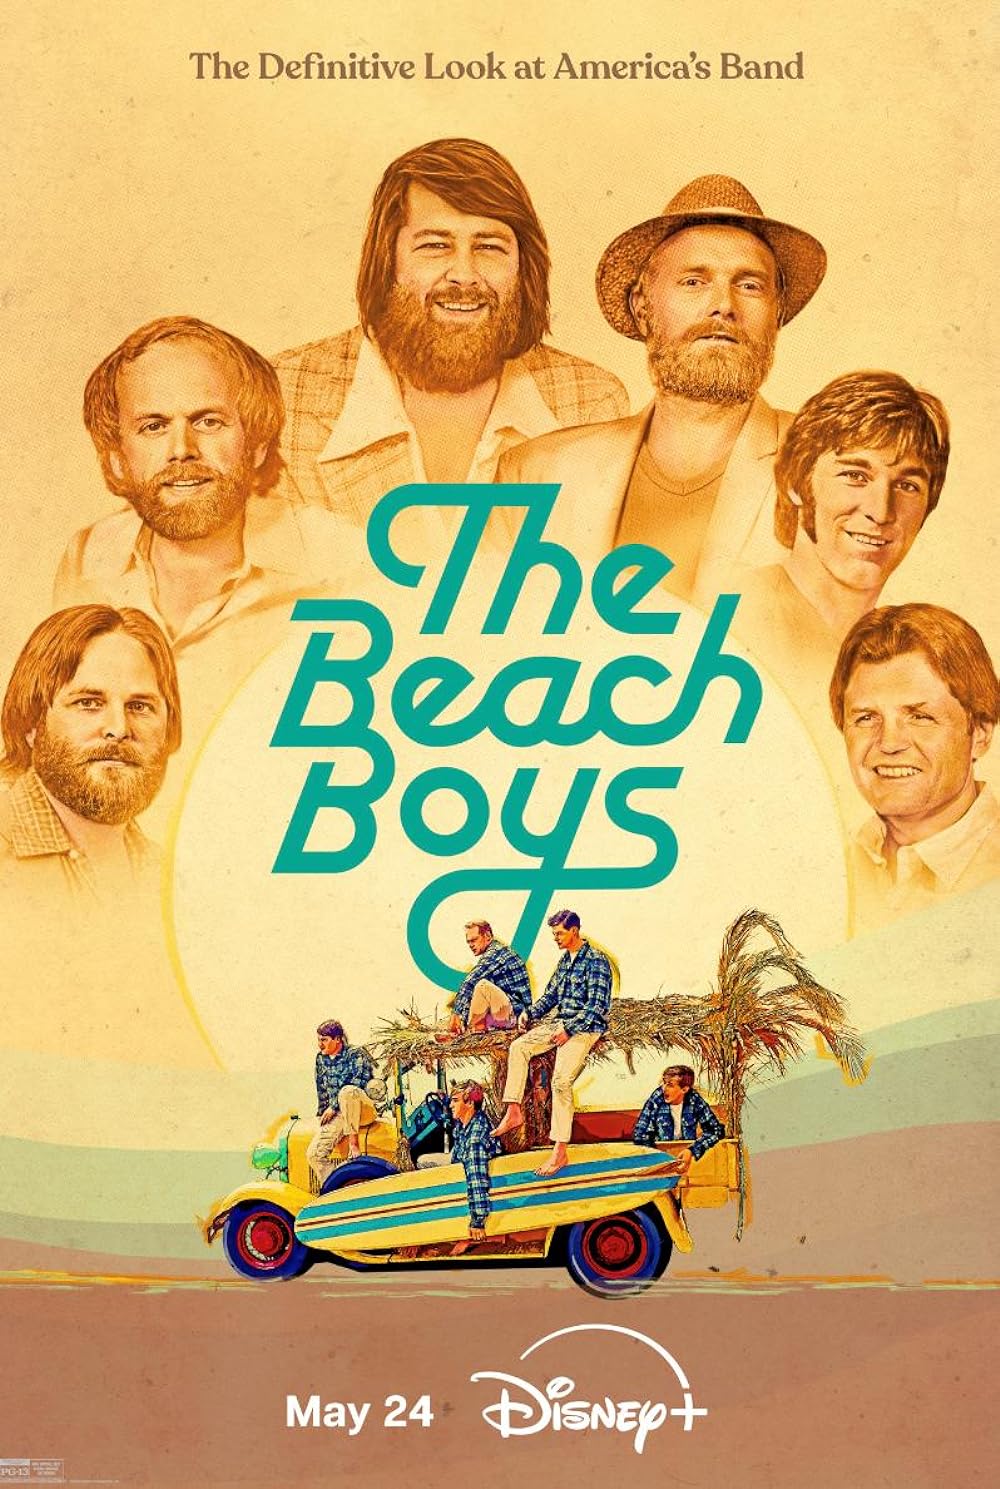 The Beach Boys (Disney+ Hotstar) – May 24The Beach Boys documentary celebrates the legendary band’s journey from humble beginnings to becoming rock icons. Featuring never-before-seen footage and interviews with band members and notable musicians like Lindsey Buckingham and Janelle Monáe, the film traces the band’s impact on pop music and their creation of the iconic “California sound,” highlighting their innovative approaches and personal stories.